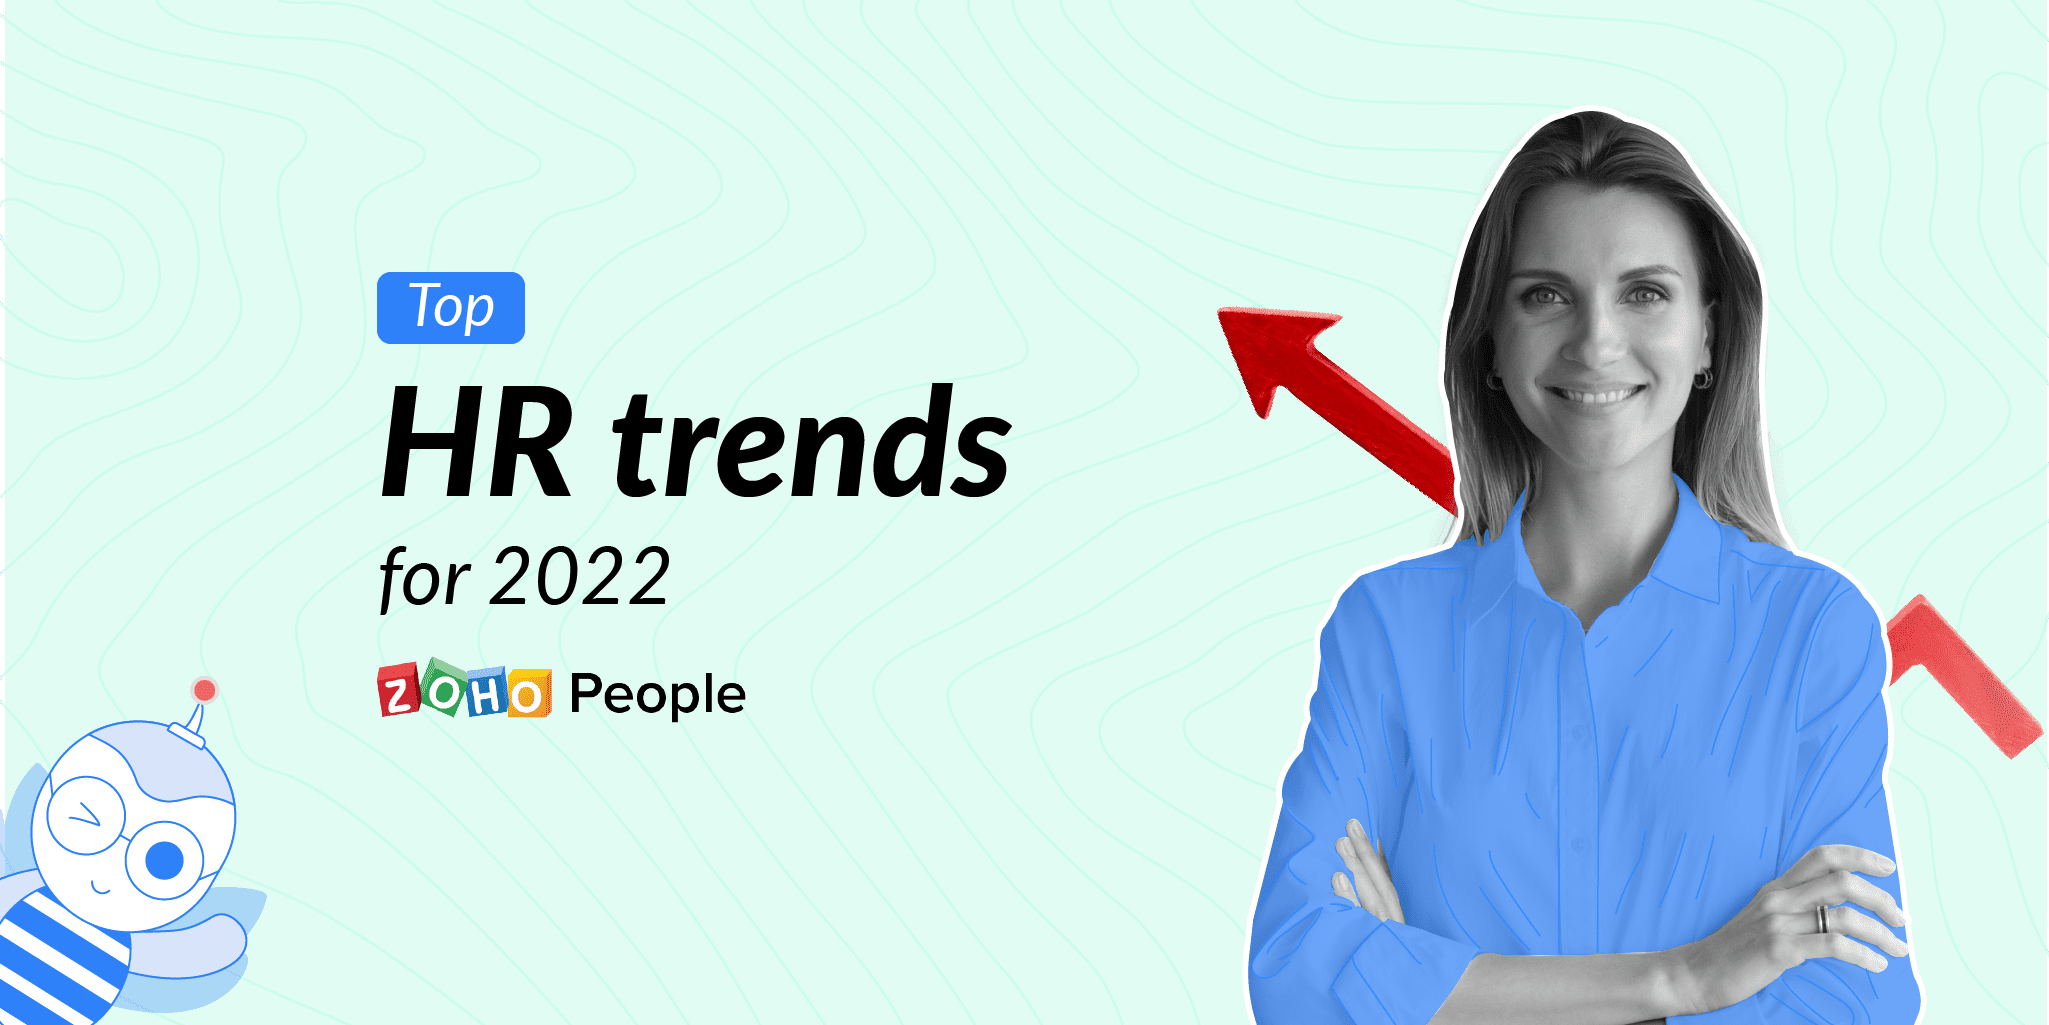 HR trends for 2022